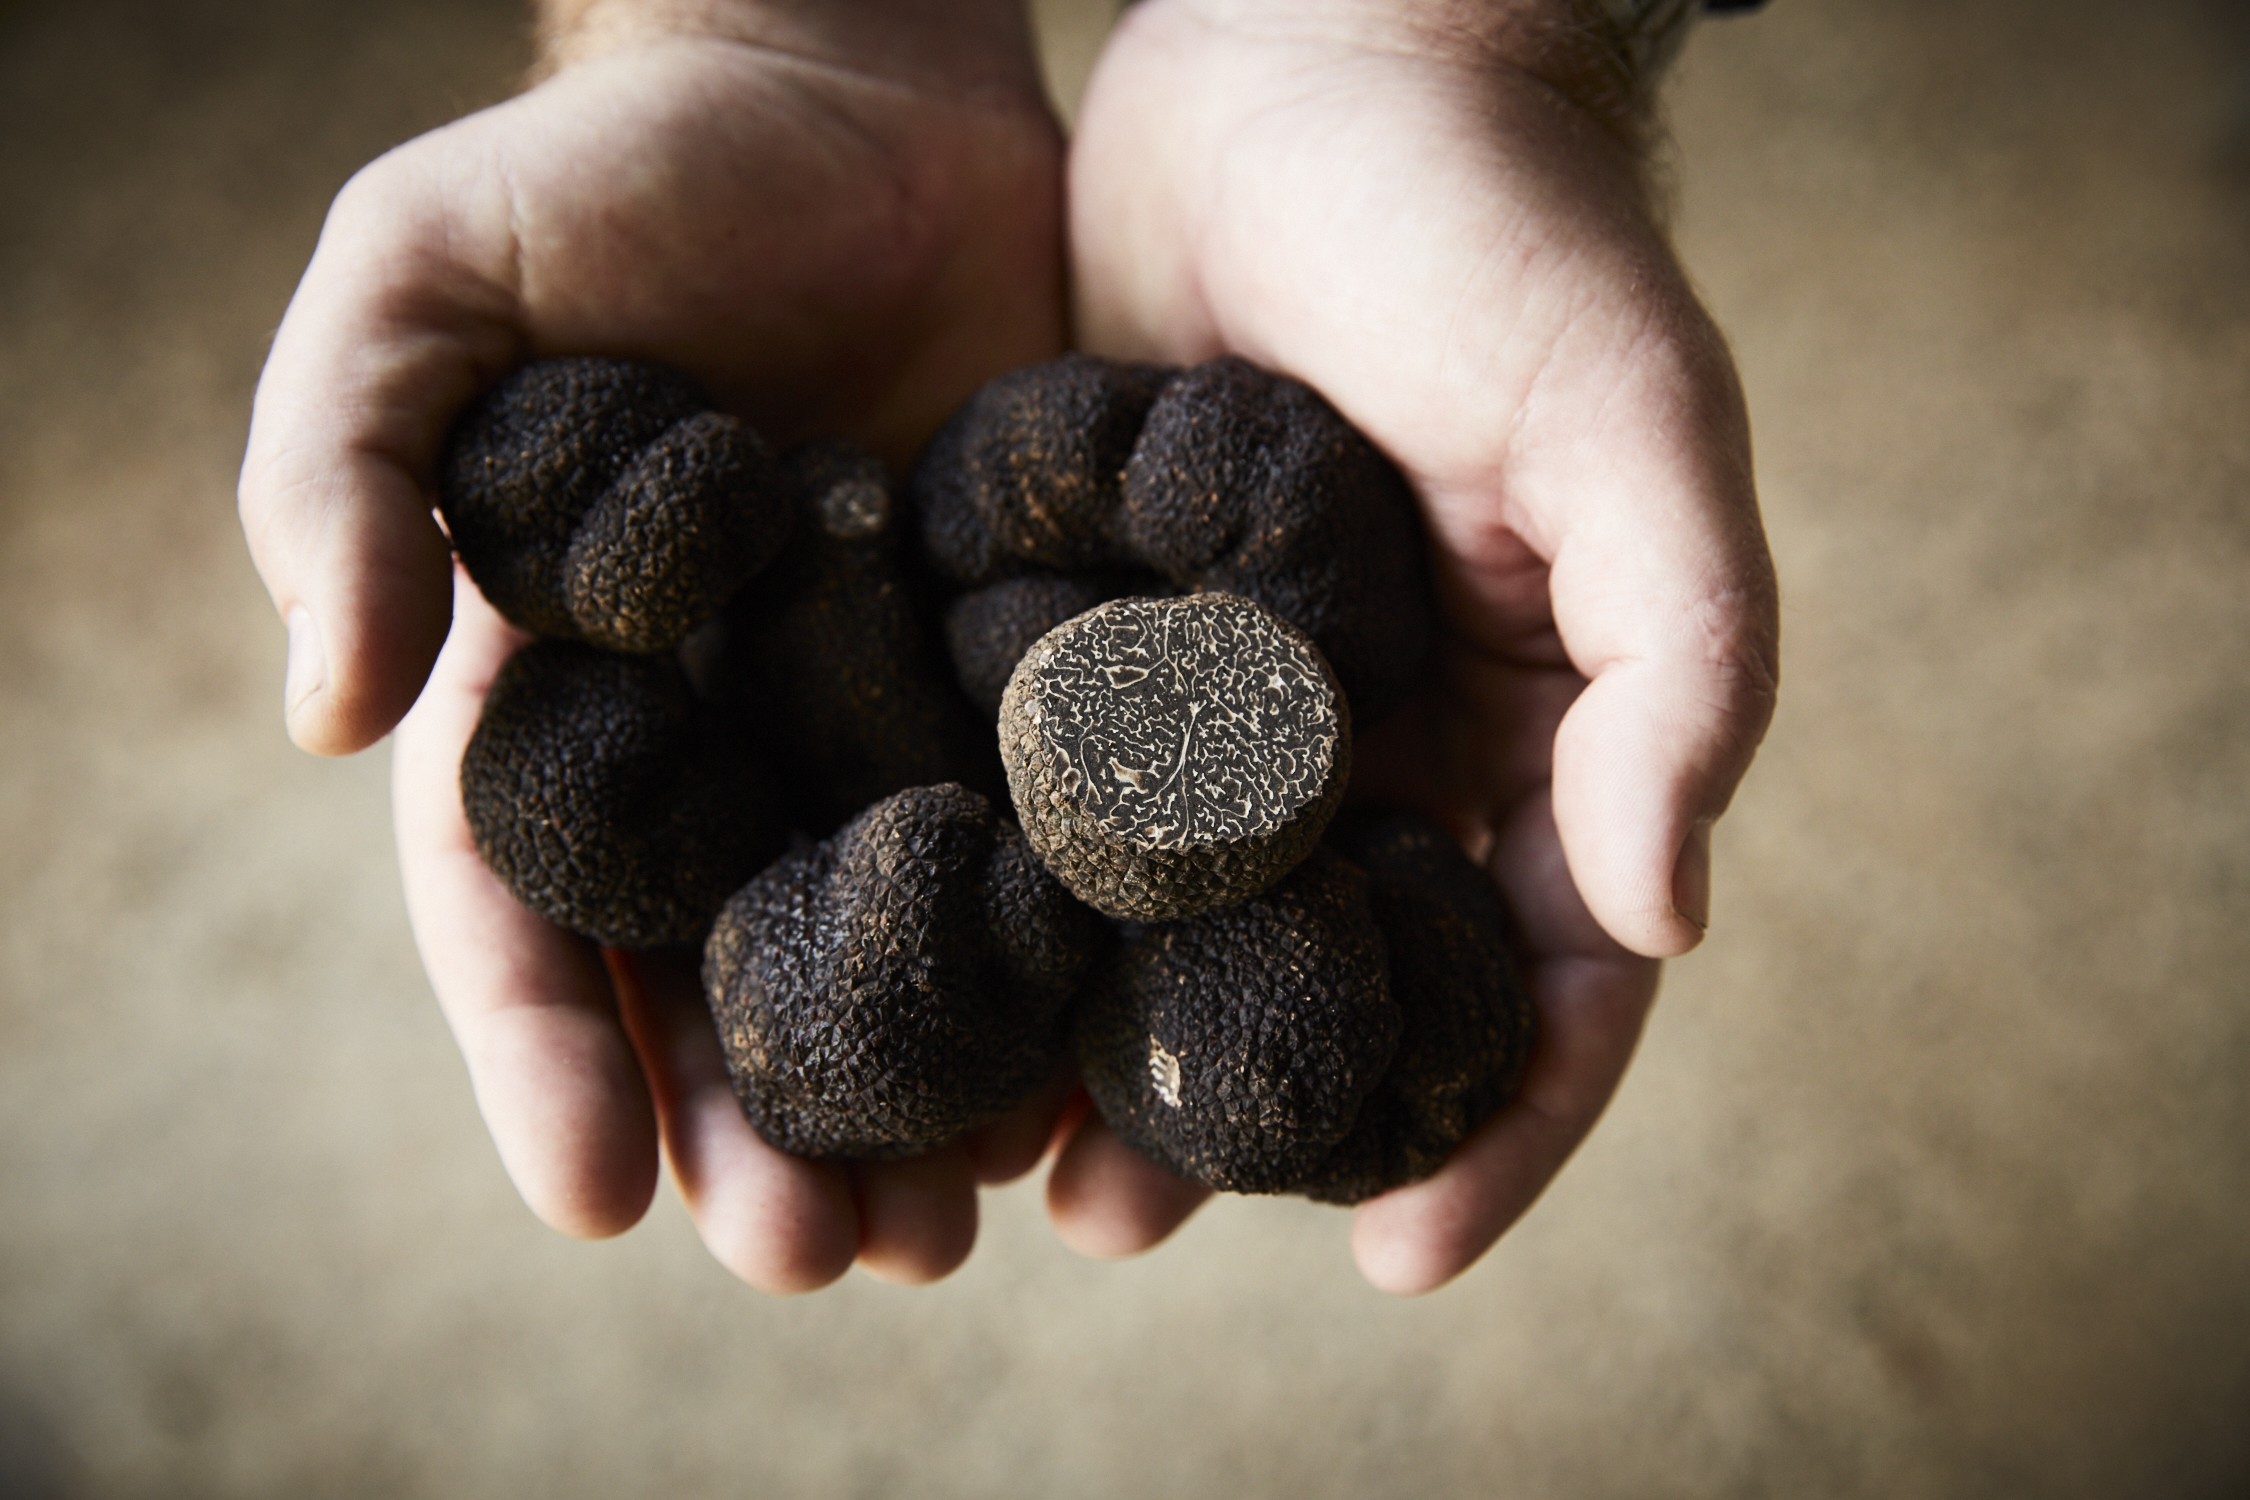 Truffles from The Truffle & Wine Co. The company is the single largest producer of ‘French’ black truffle in the southern hemisphere. Australia is expected to produce 15 tonnes this year.